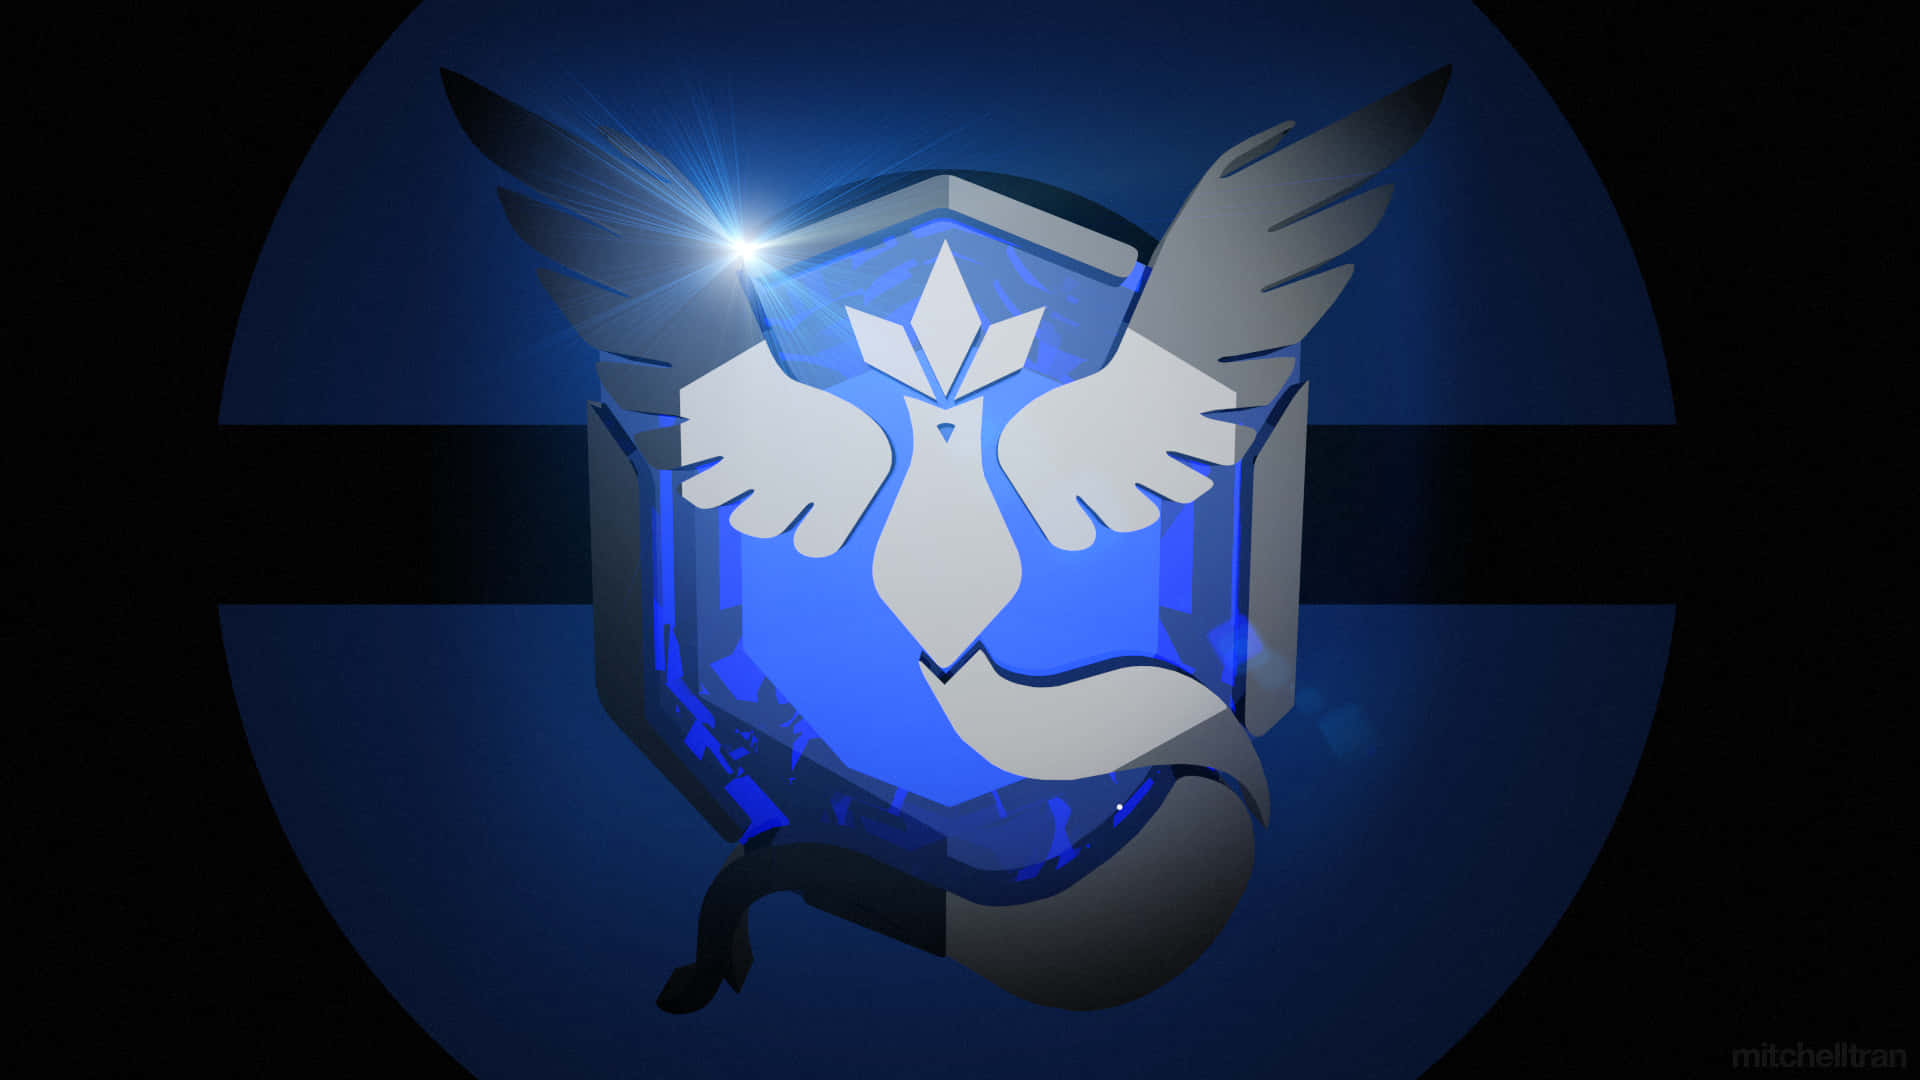 Believe In Team Mystic And Achieve Victory! Background